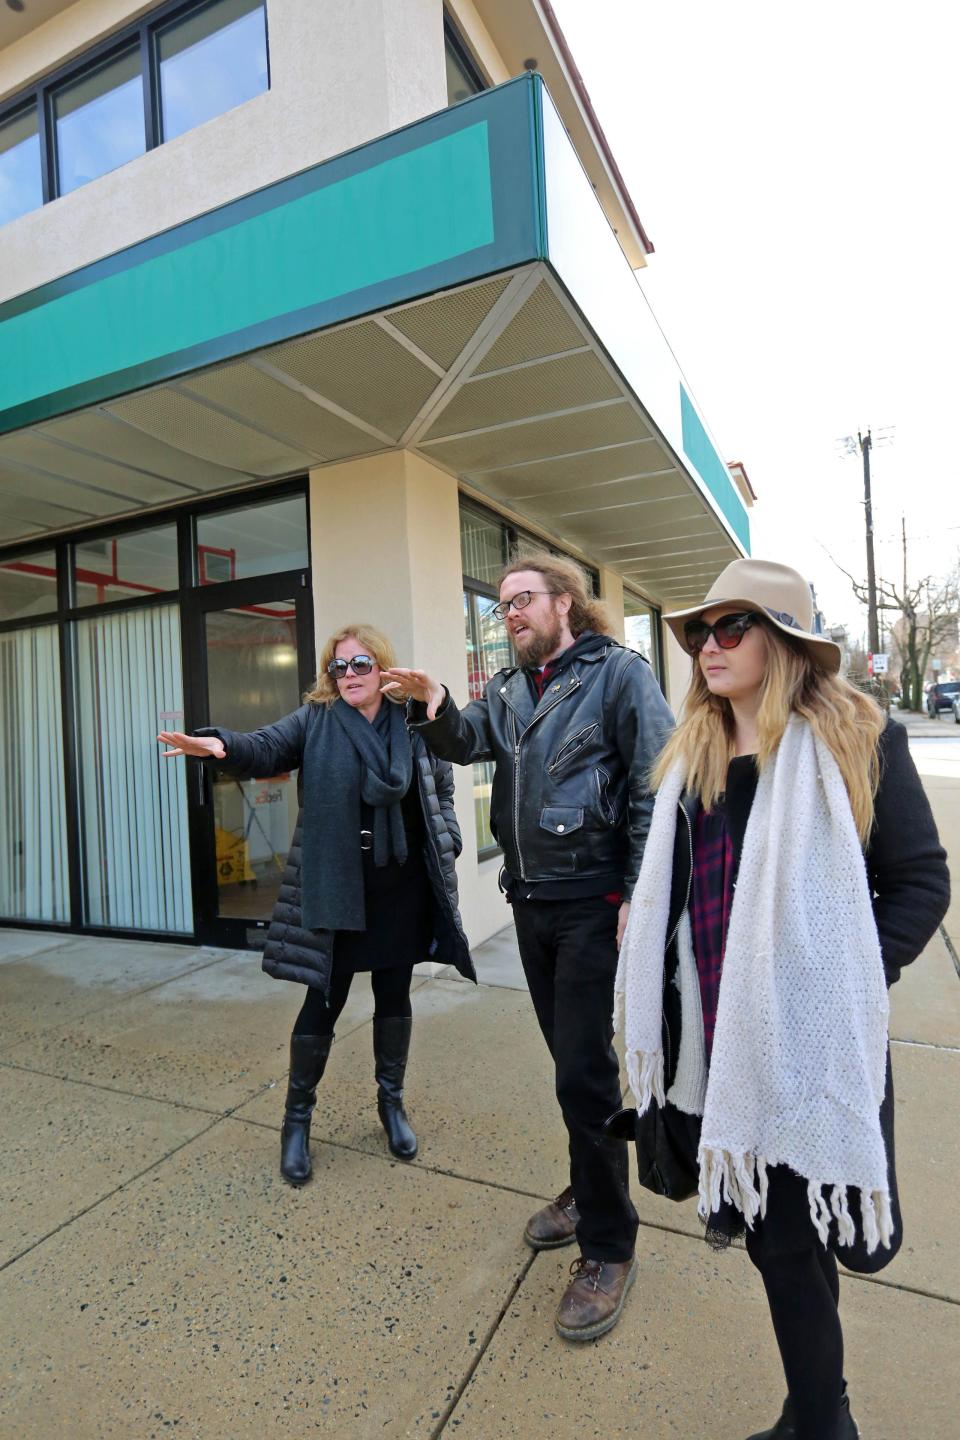 Alisa Morkides, the founder of Brew HaHa! (left), with Todd Purse and his wife Ally in 2015 discussing plans for the expanded Brew HaHa! in Wilmington's Trolley Square area.